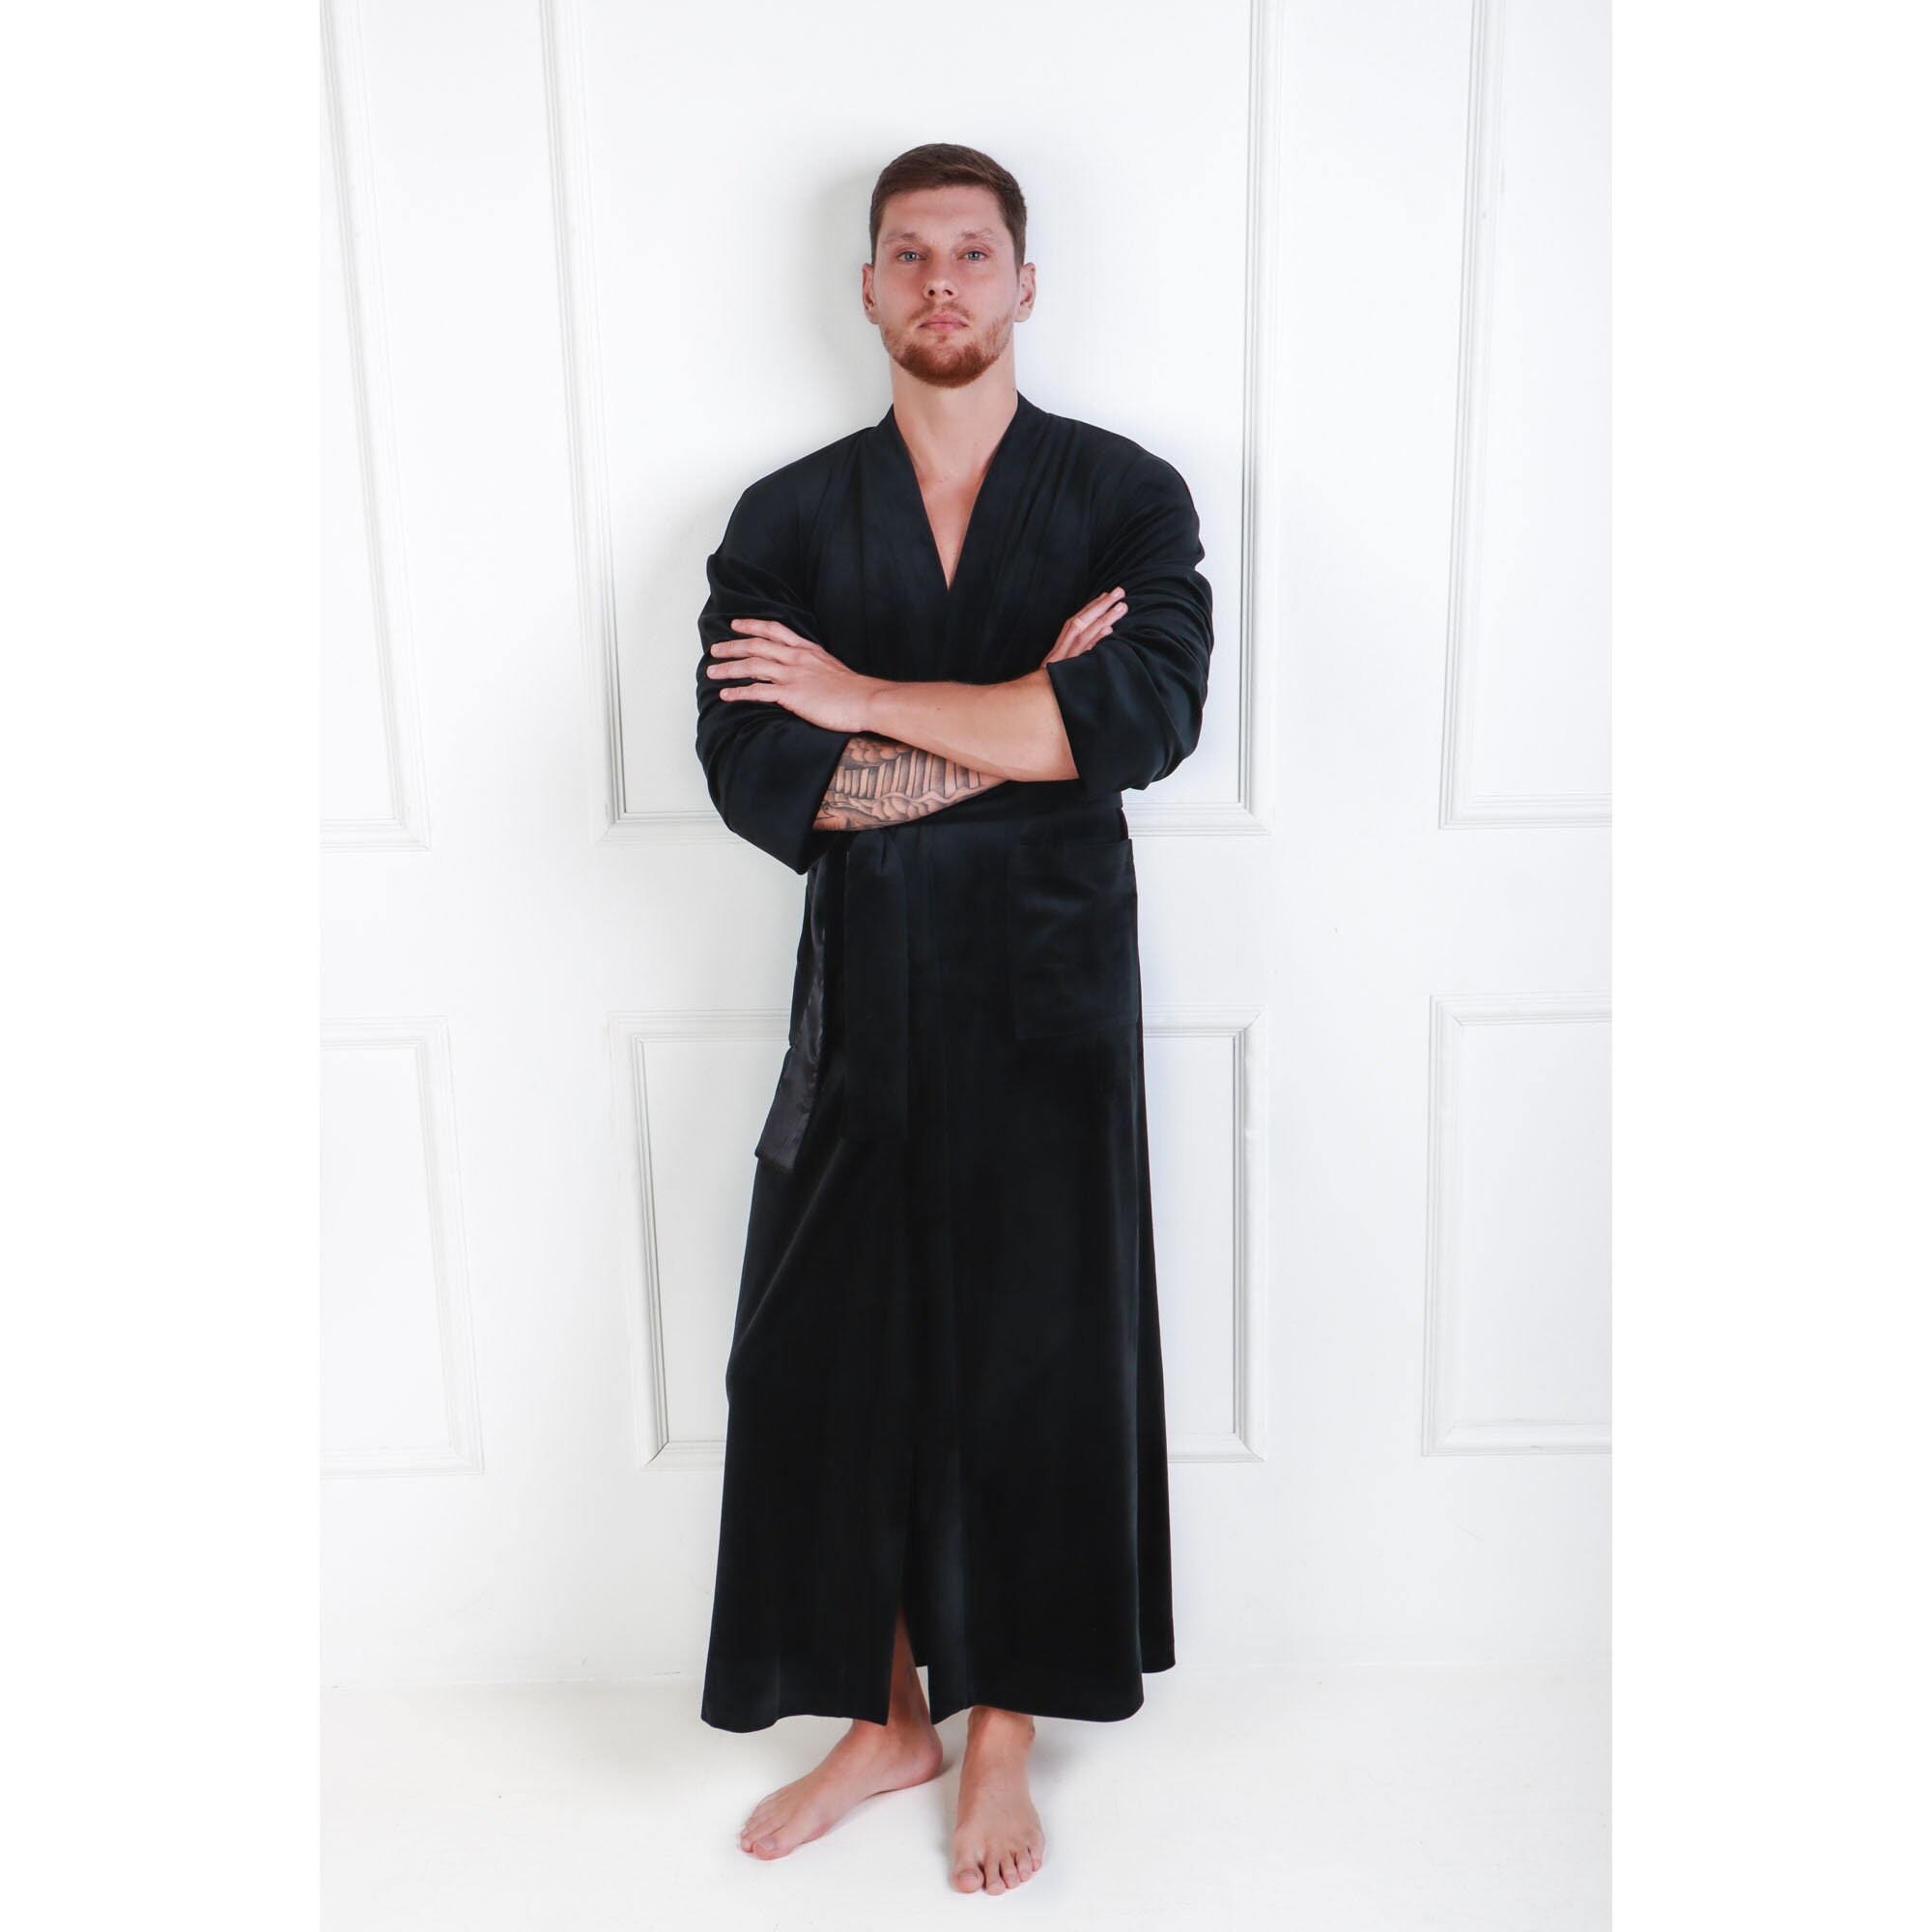 Pacific Style Light Weight Full Length Hooded Turkish Cotton Bathrobe